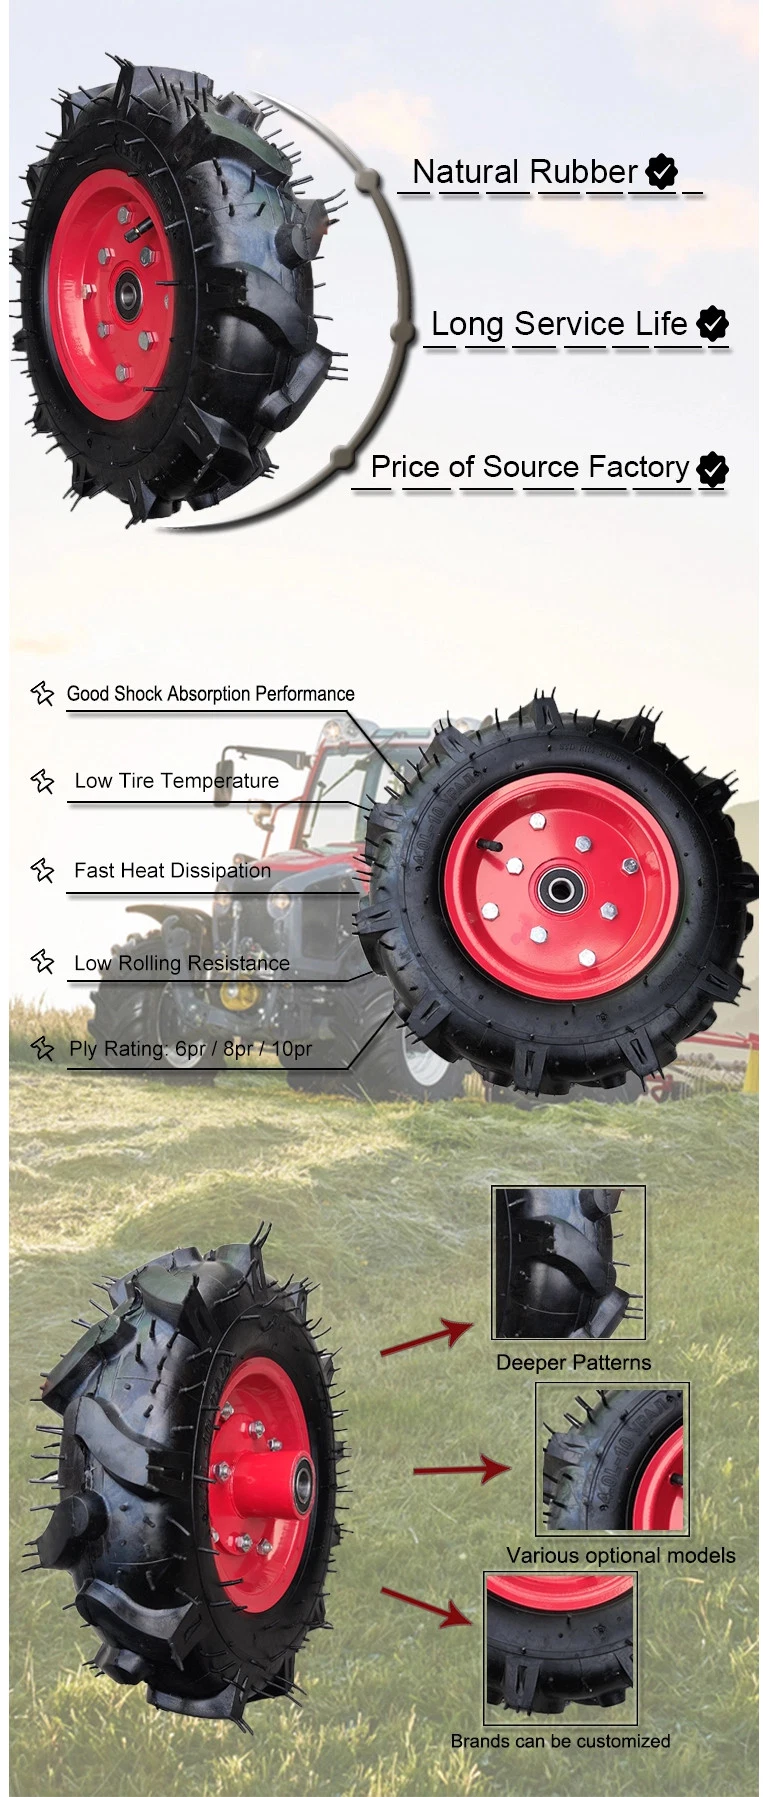 Best Price Agricultural 4.00-8 /4.00-10 Tractor Tire